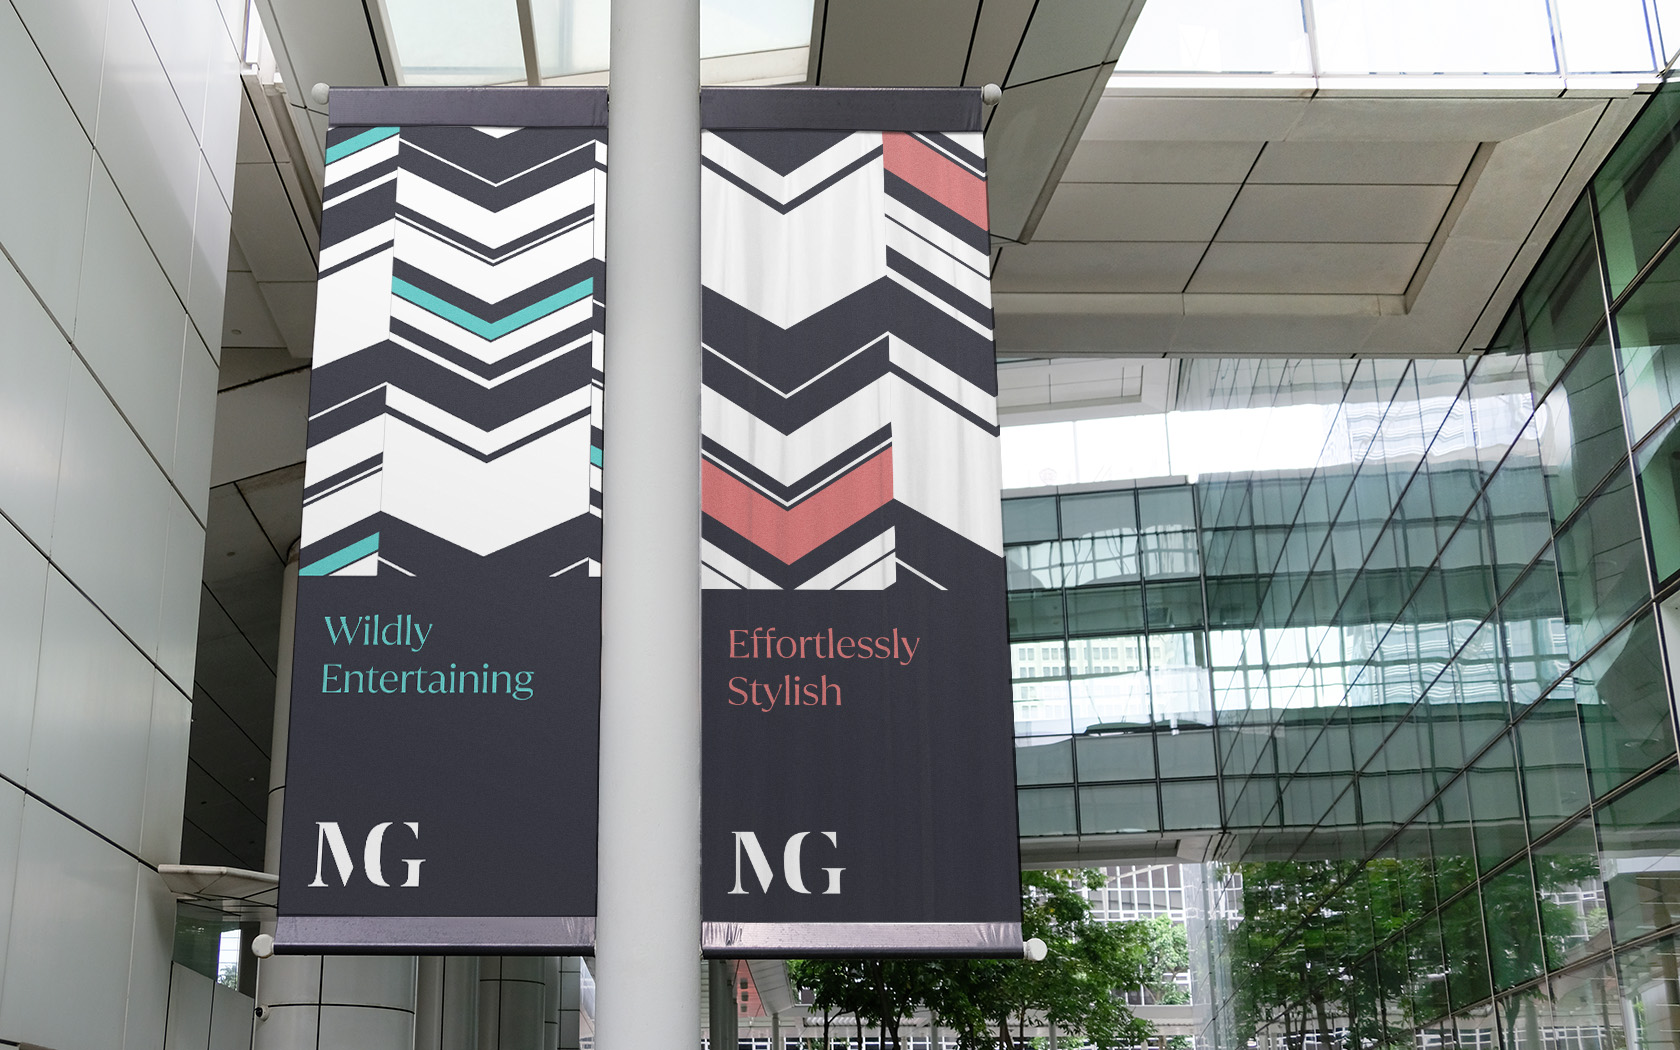 Marassi Galleria. Hanging banners styles